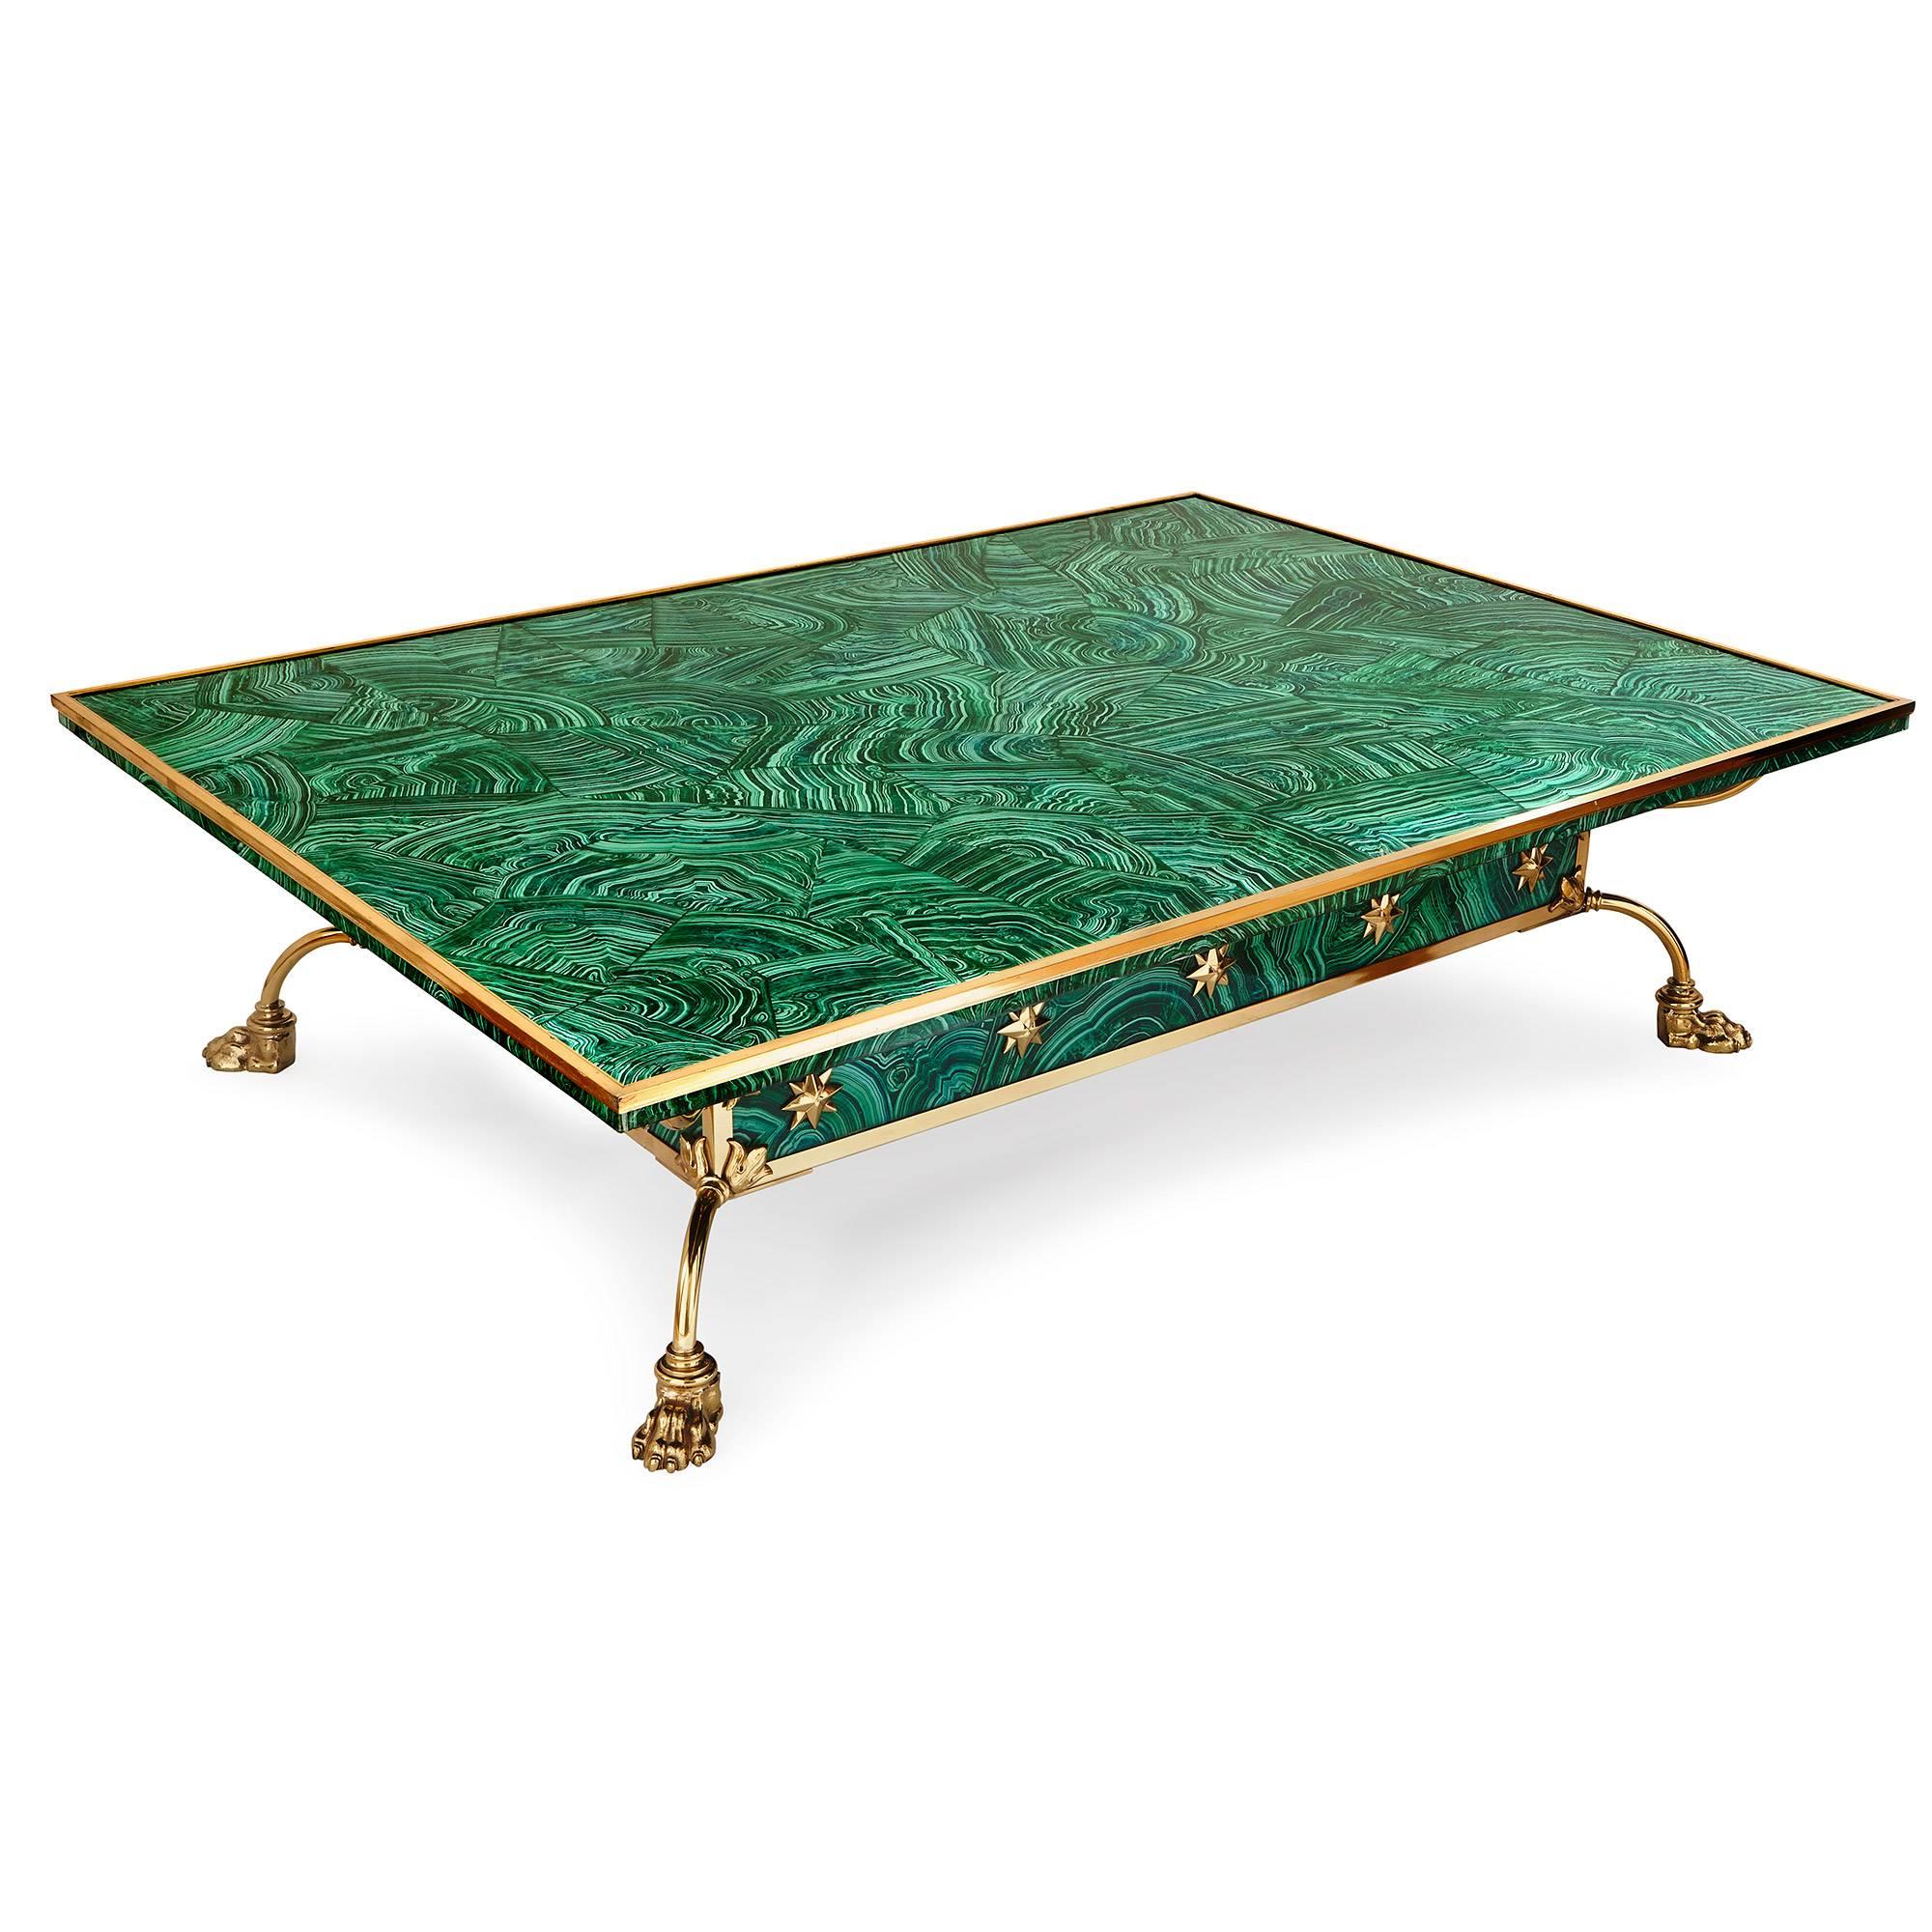 This bright green coffee table will make an impressive statement in a modern interior. Built with a cool green faux malachite veneer and mounted with brass, the table radiates color, light, and style. 

It is rectangular in shape and set on four